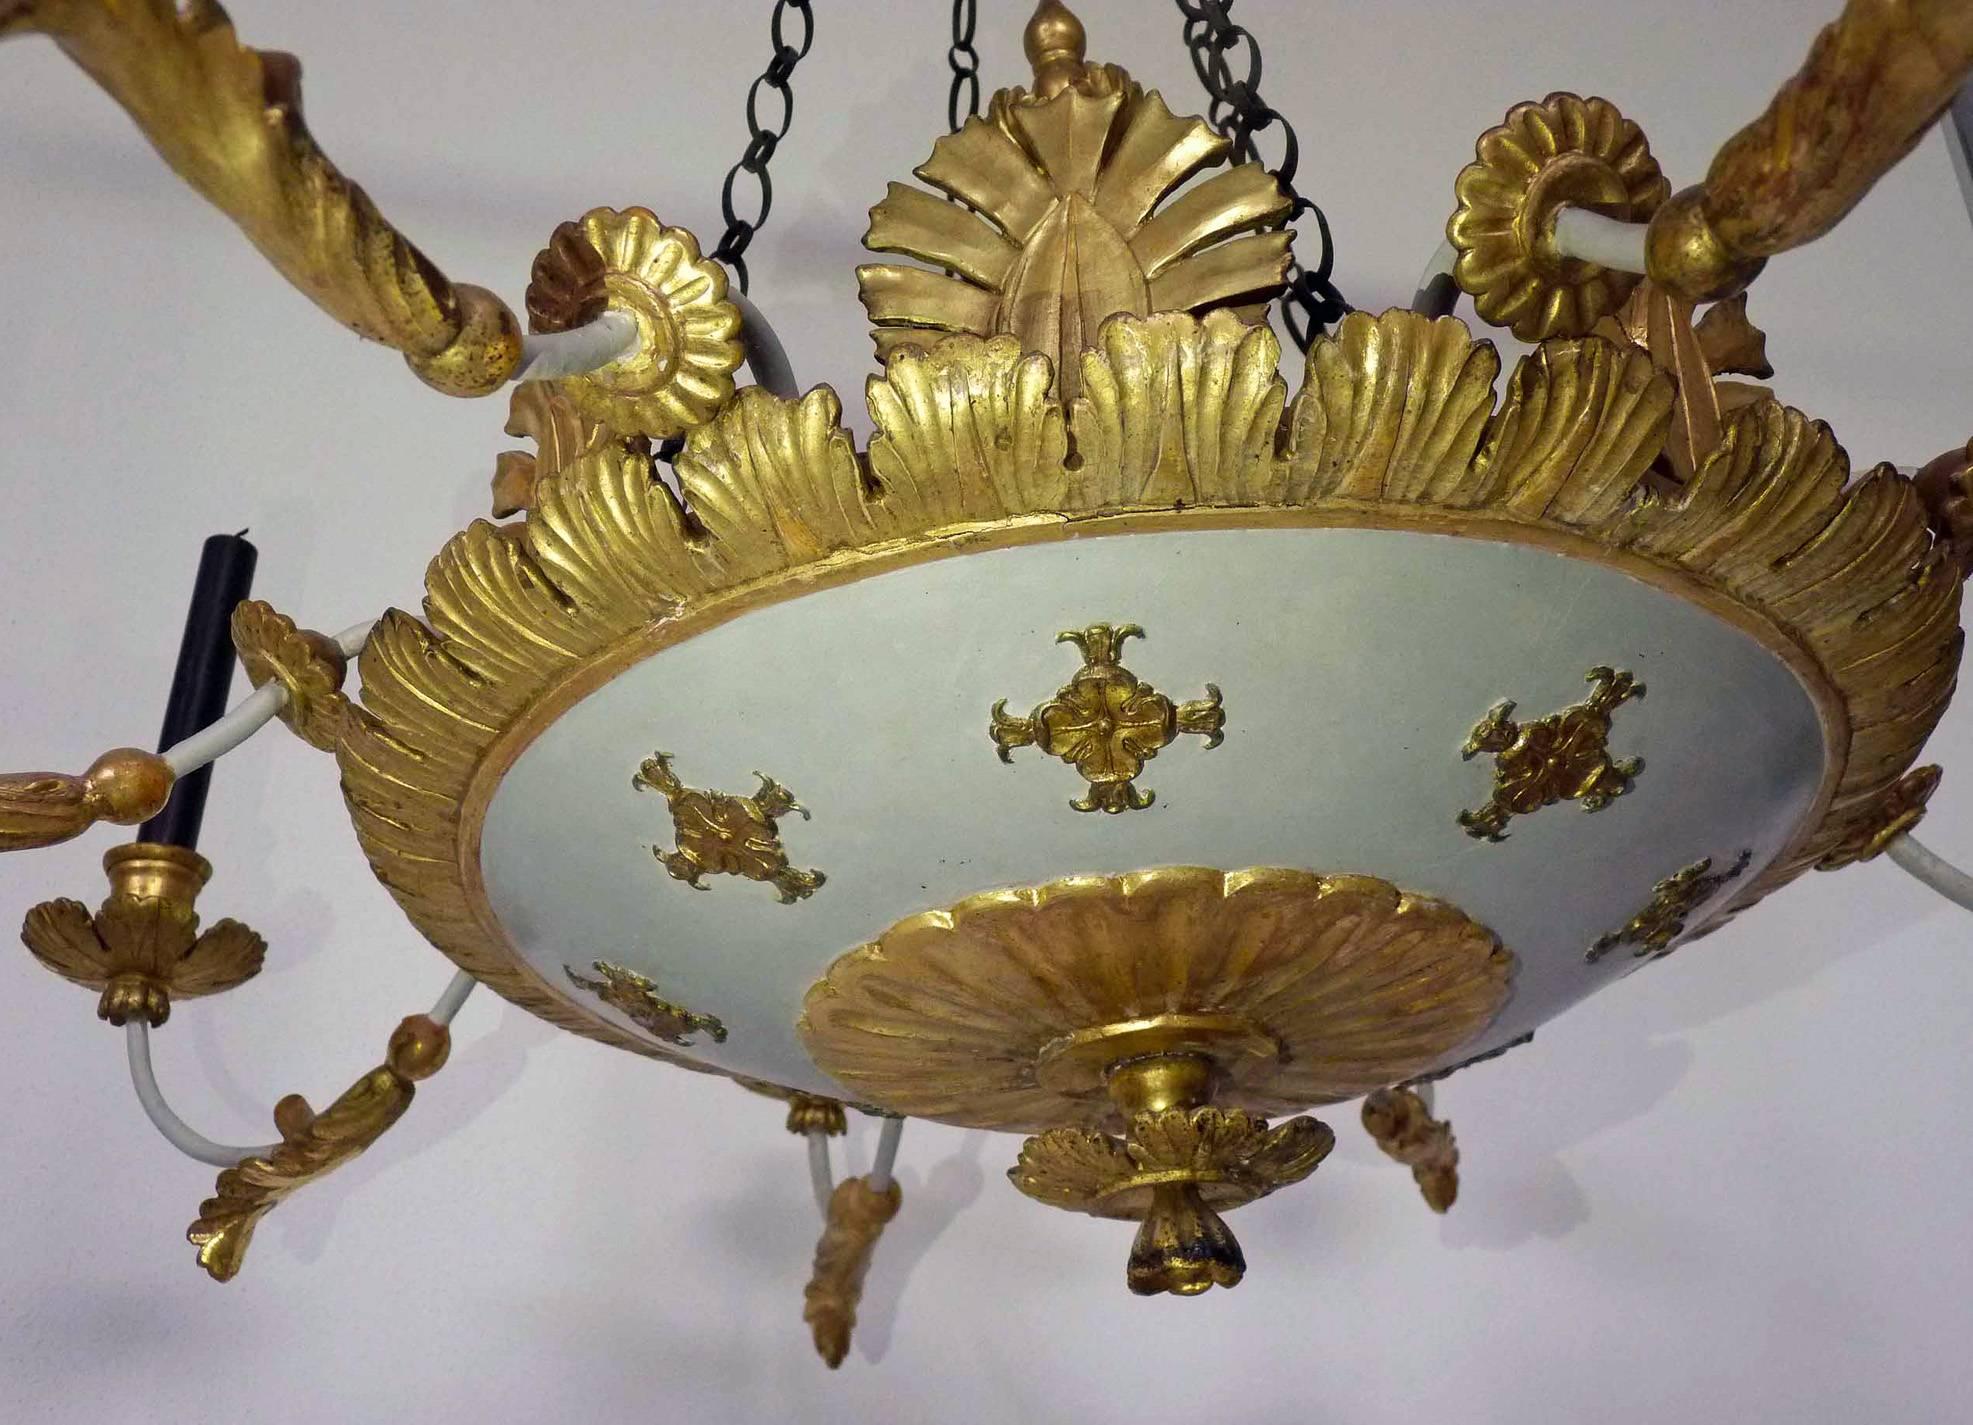 Eight armed Ceiling lamp, Hand carved wood leaf gilt, Germany c.1800  - Other Art Style Art by Unknown